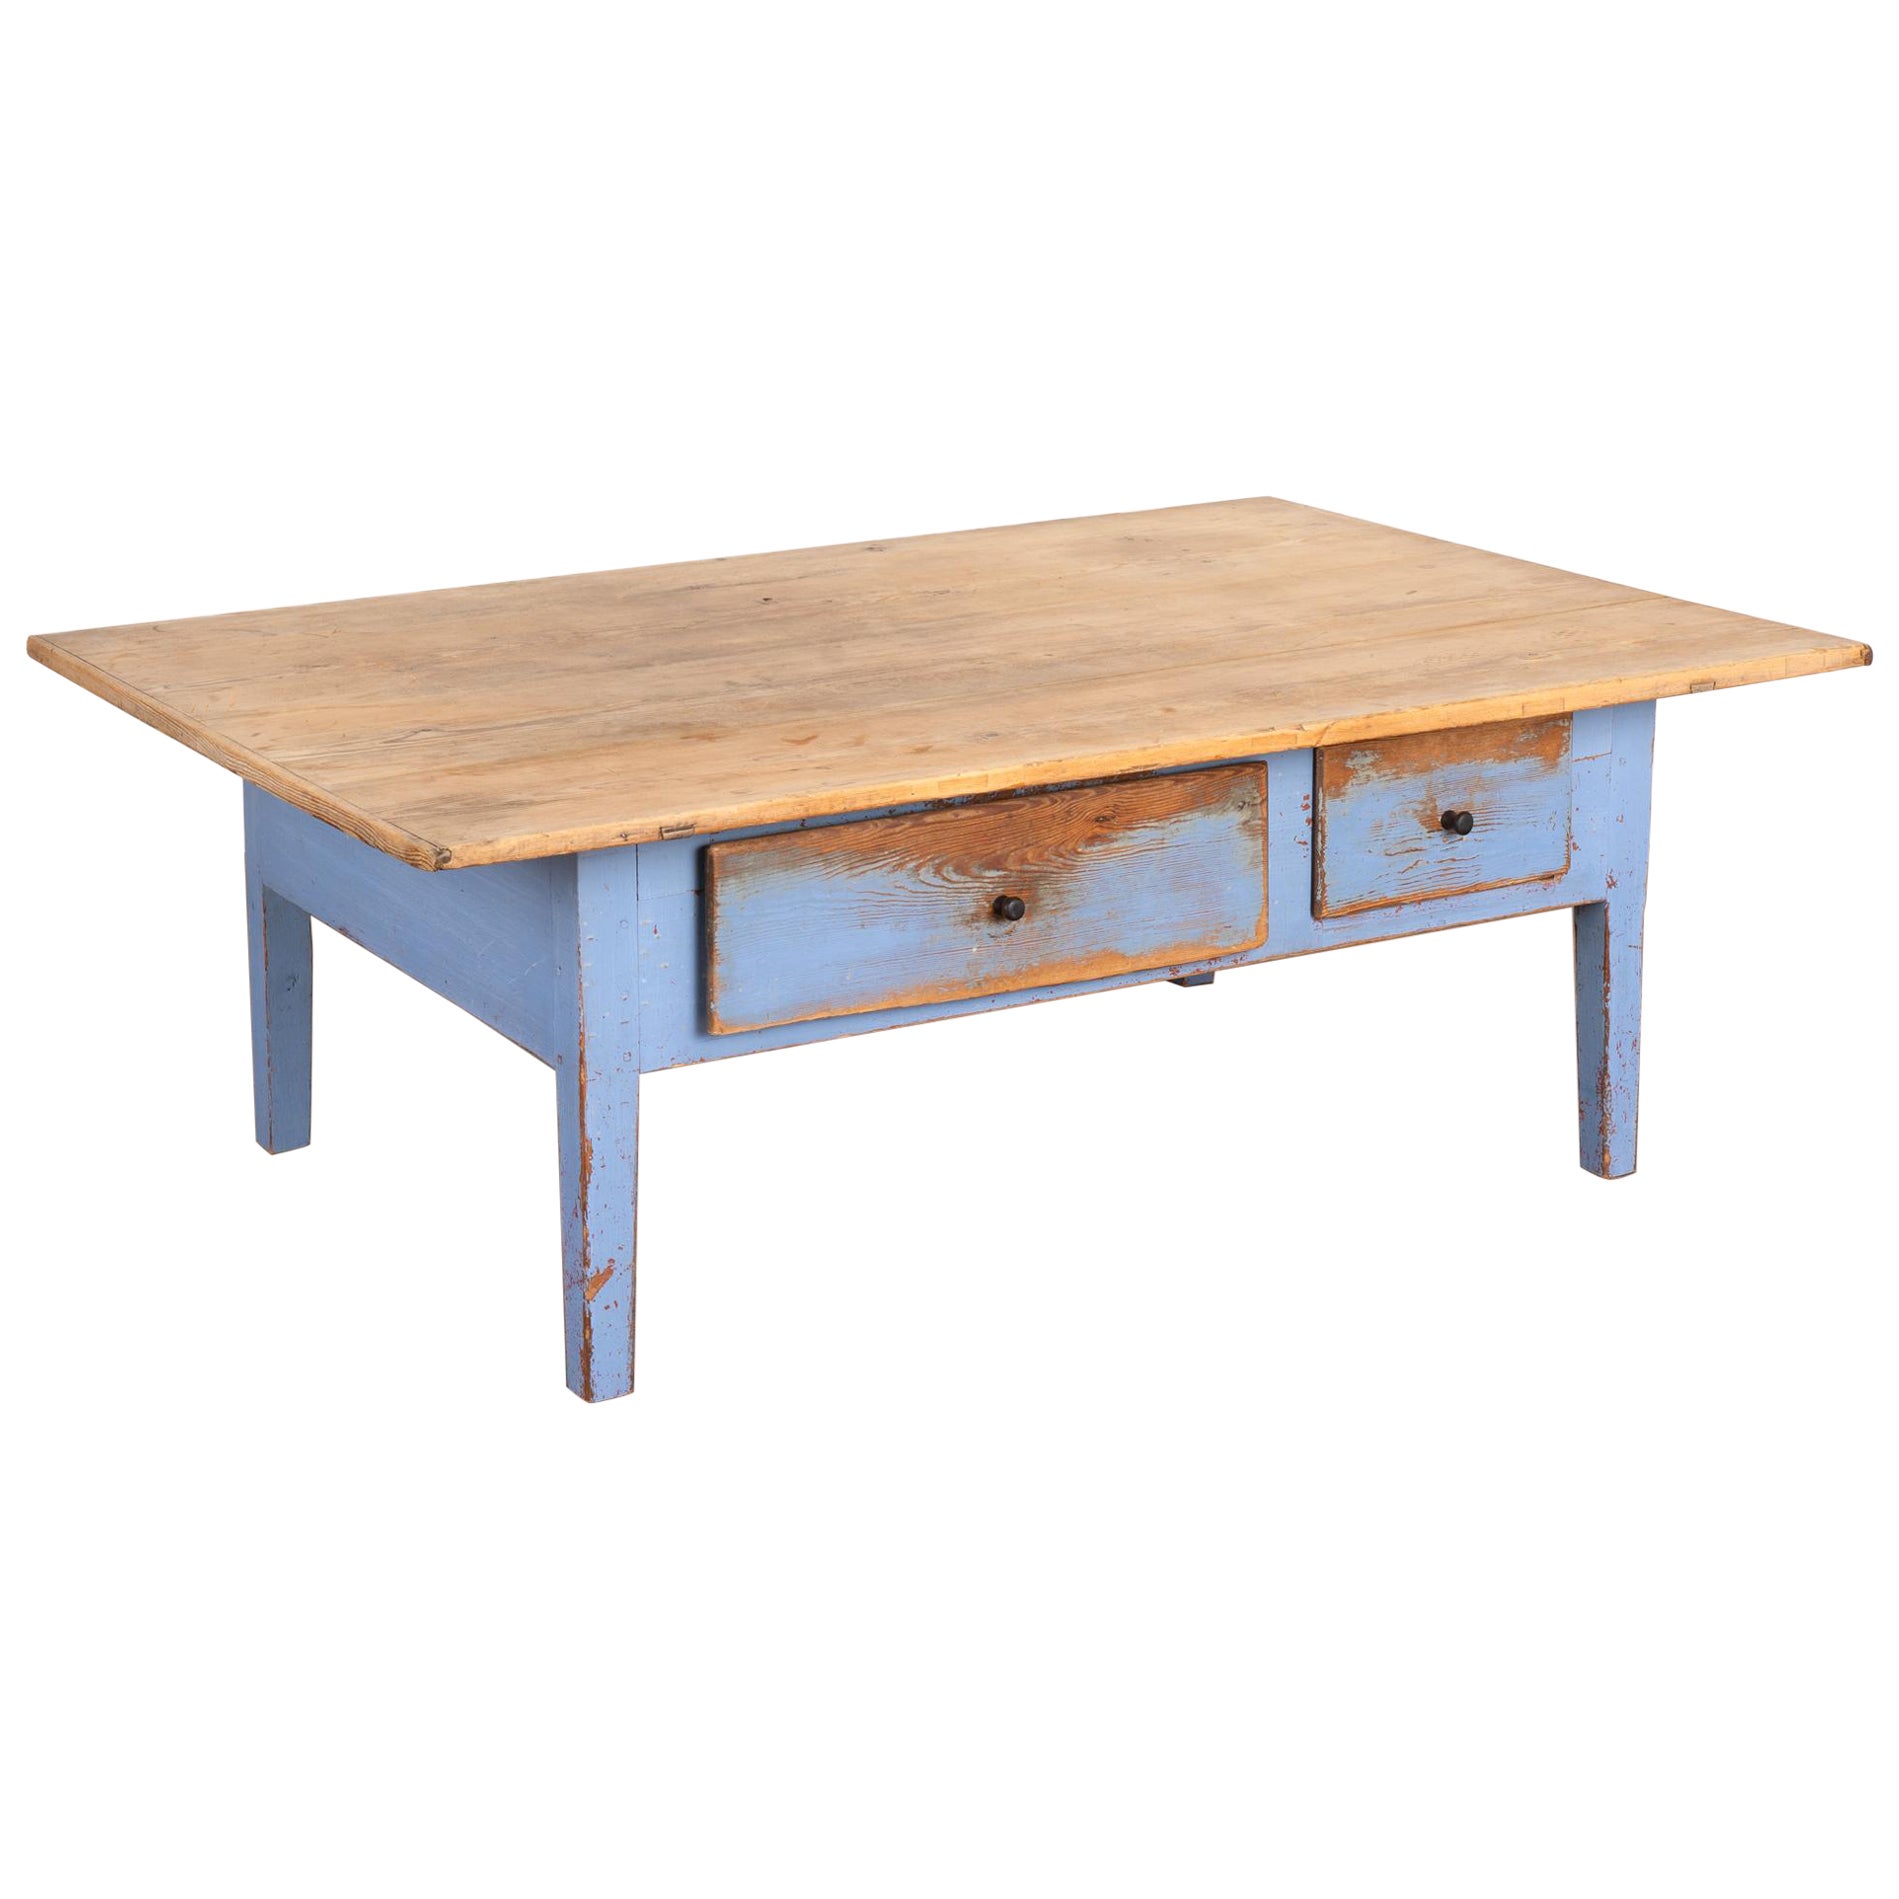 Rustic Blue Painted Pine Coffee Table With Two Drawers, Sweden circa 1860-80